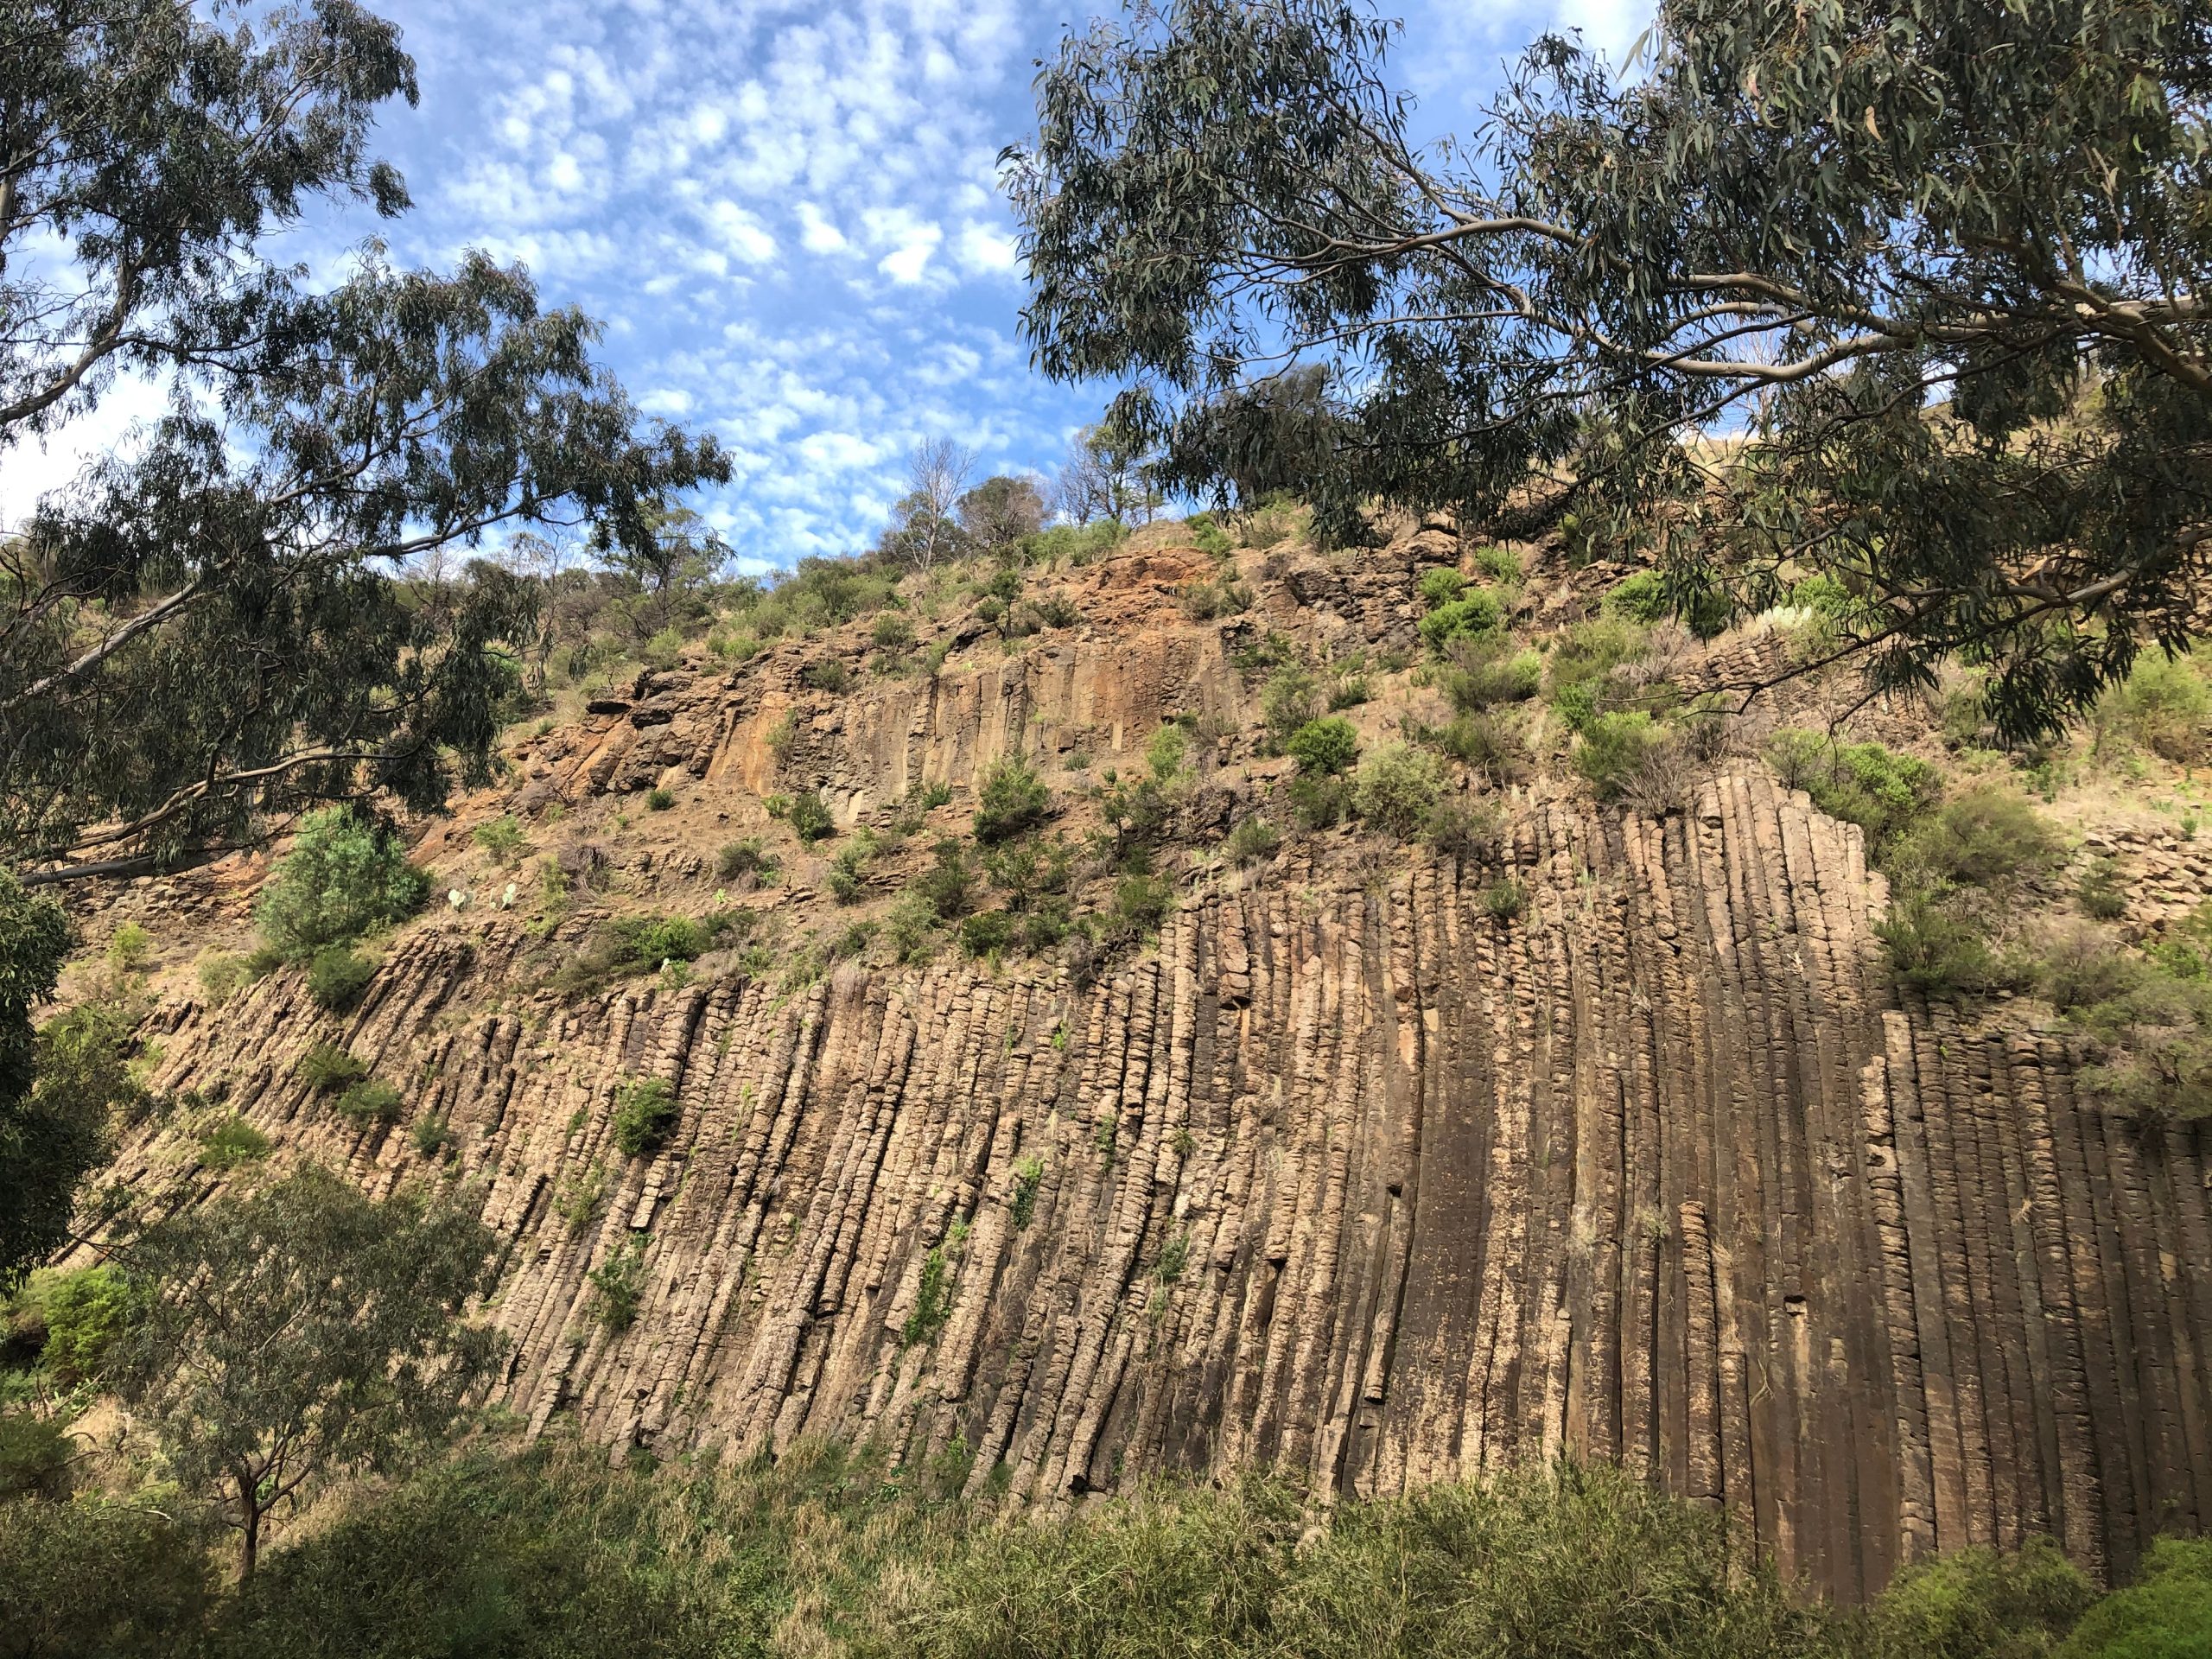 Organ Pipes National Park in Victoria, Australia which was formed by an old volcano.